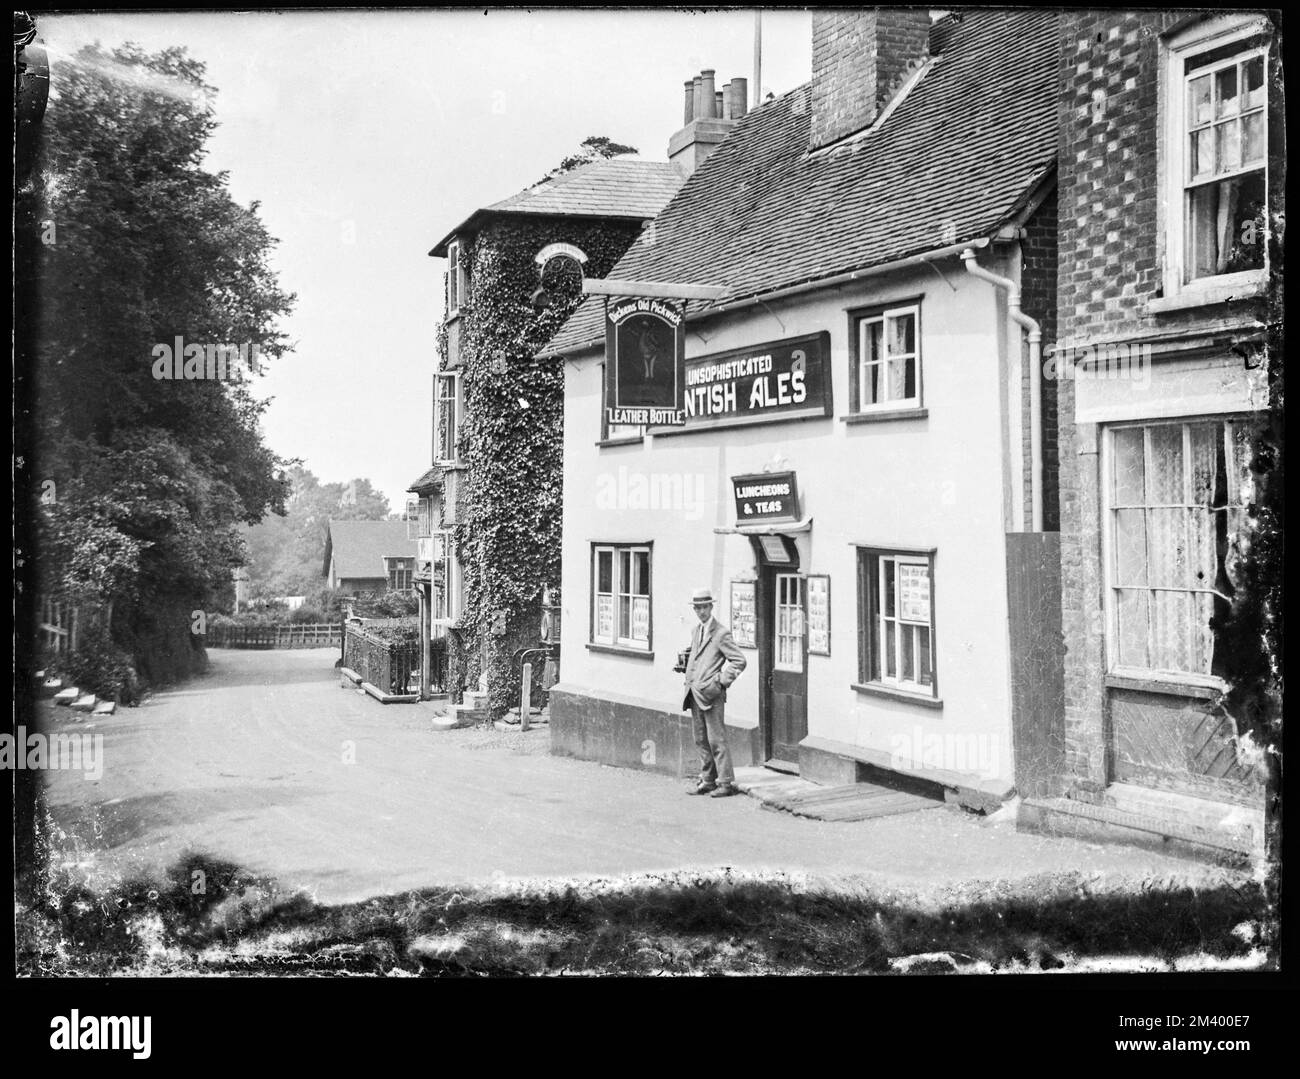 Dickens Old Pickwick Leather Bottle public house in Cobham, Kent in the 1920s.  Digitised archive copy from an original quarter-plate glass negative. Stock Photo